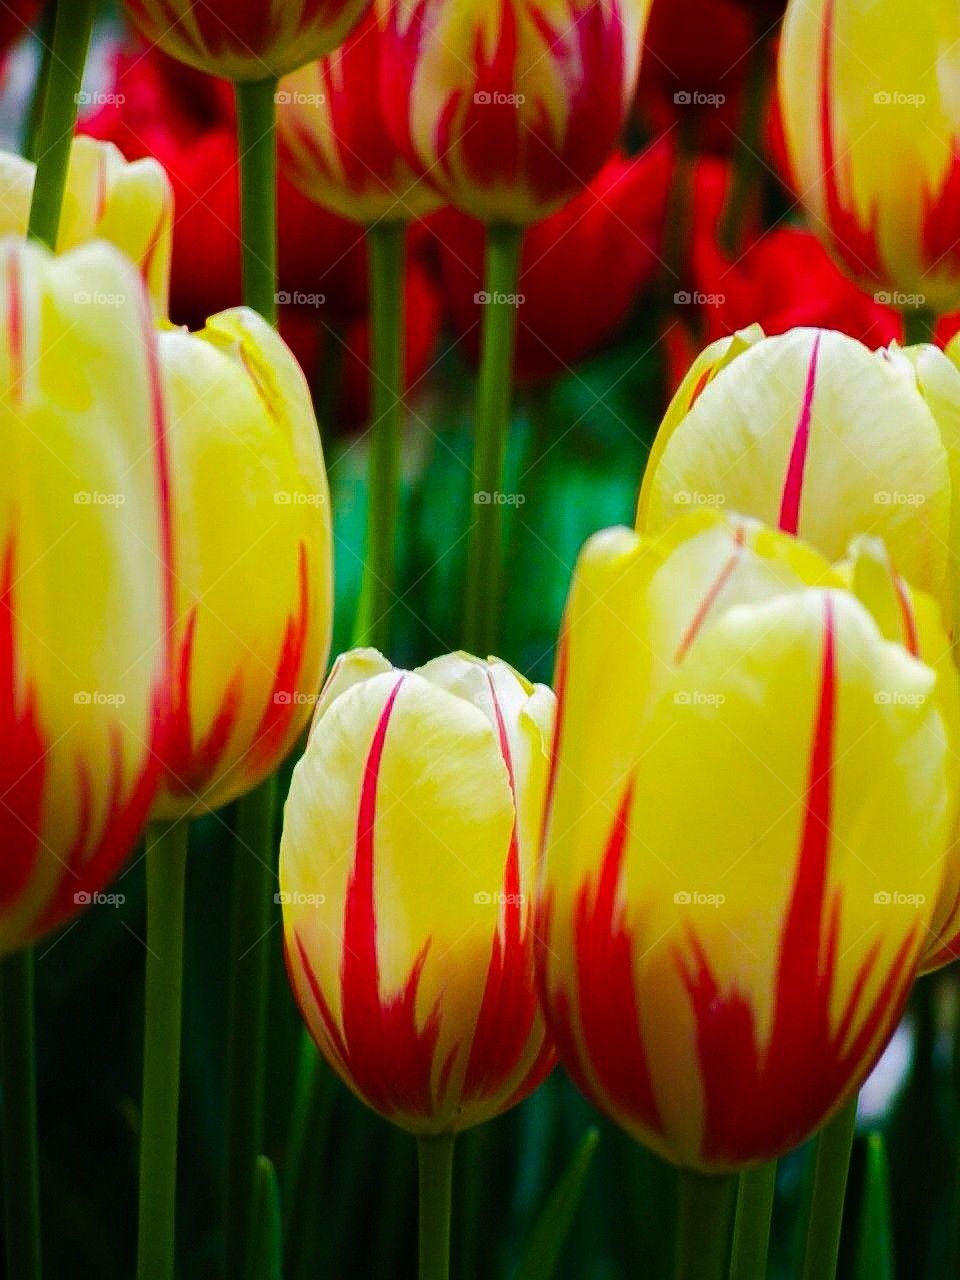 Tulips in flames